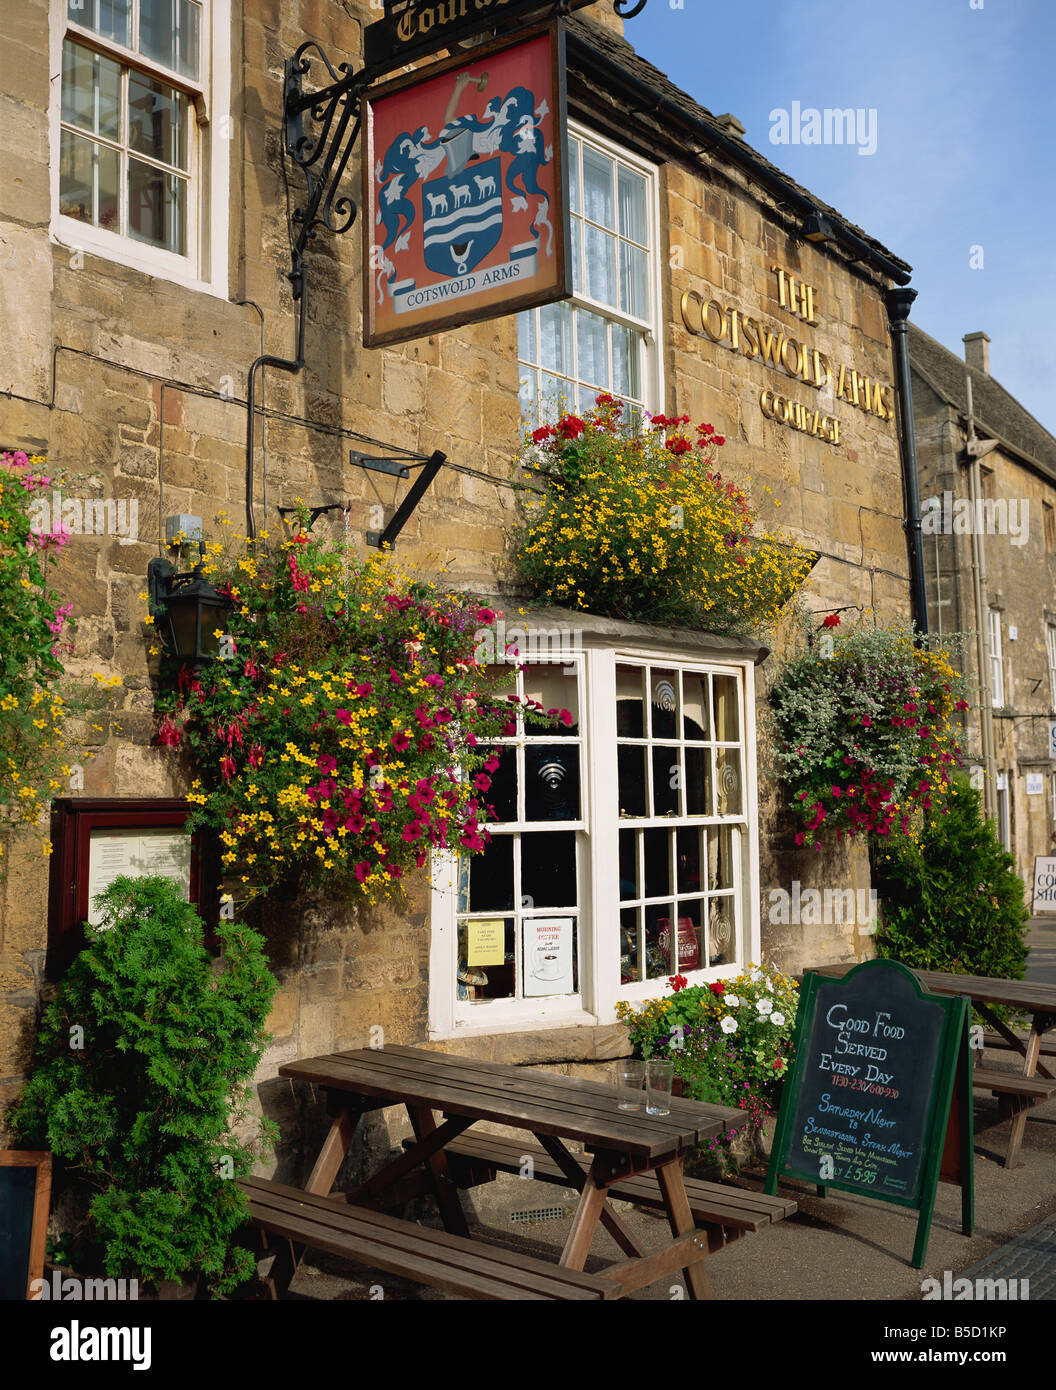 The Cotswold Arms Hotel in the town of Burford in the Cotswolds Oxfordshire England R Rainford Stock Photo